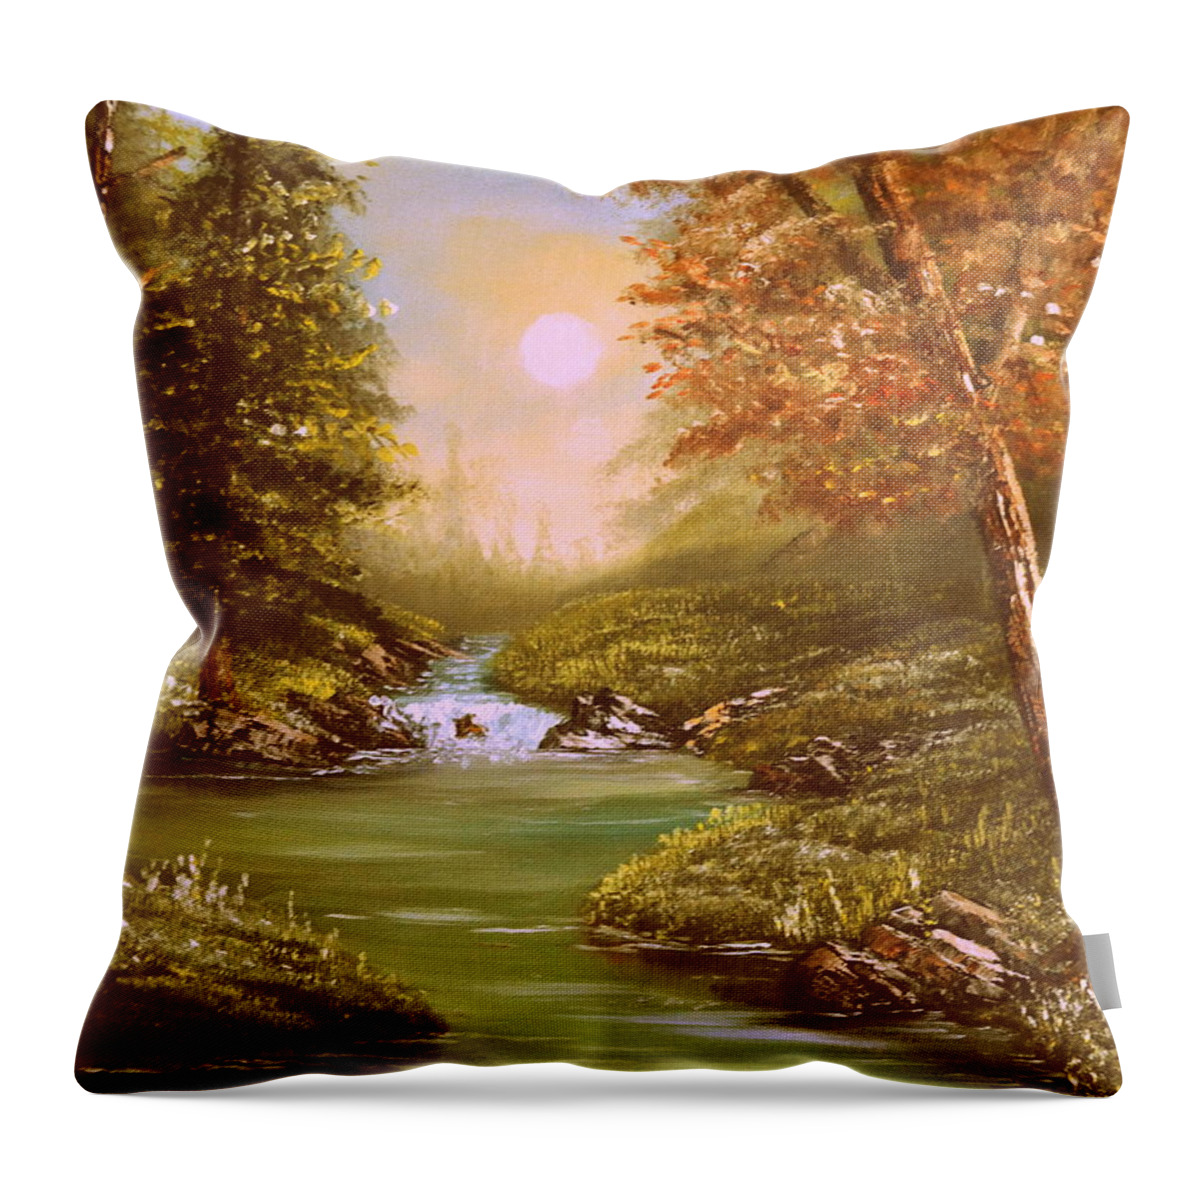 A Day Time Scene Of A Forest With Evergreen Trees Throw Pillow featuring the painting Forest Stream by Martin Schmidt